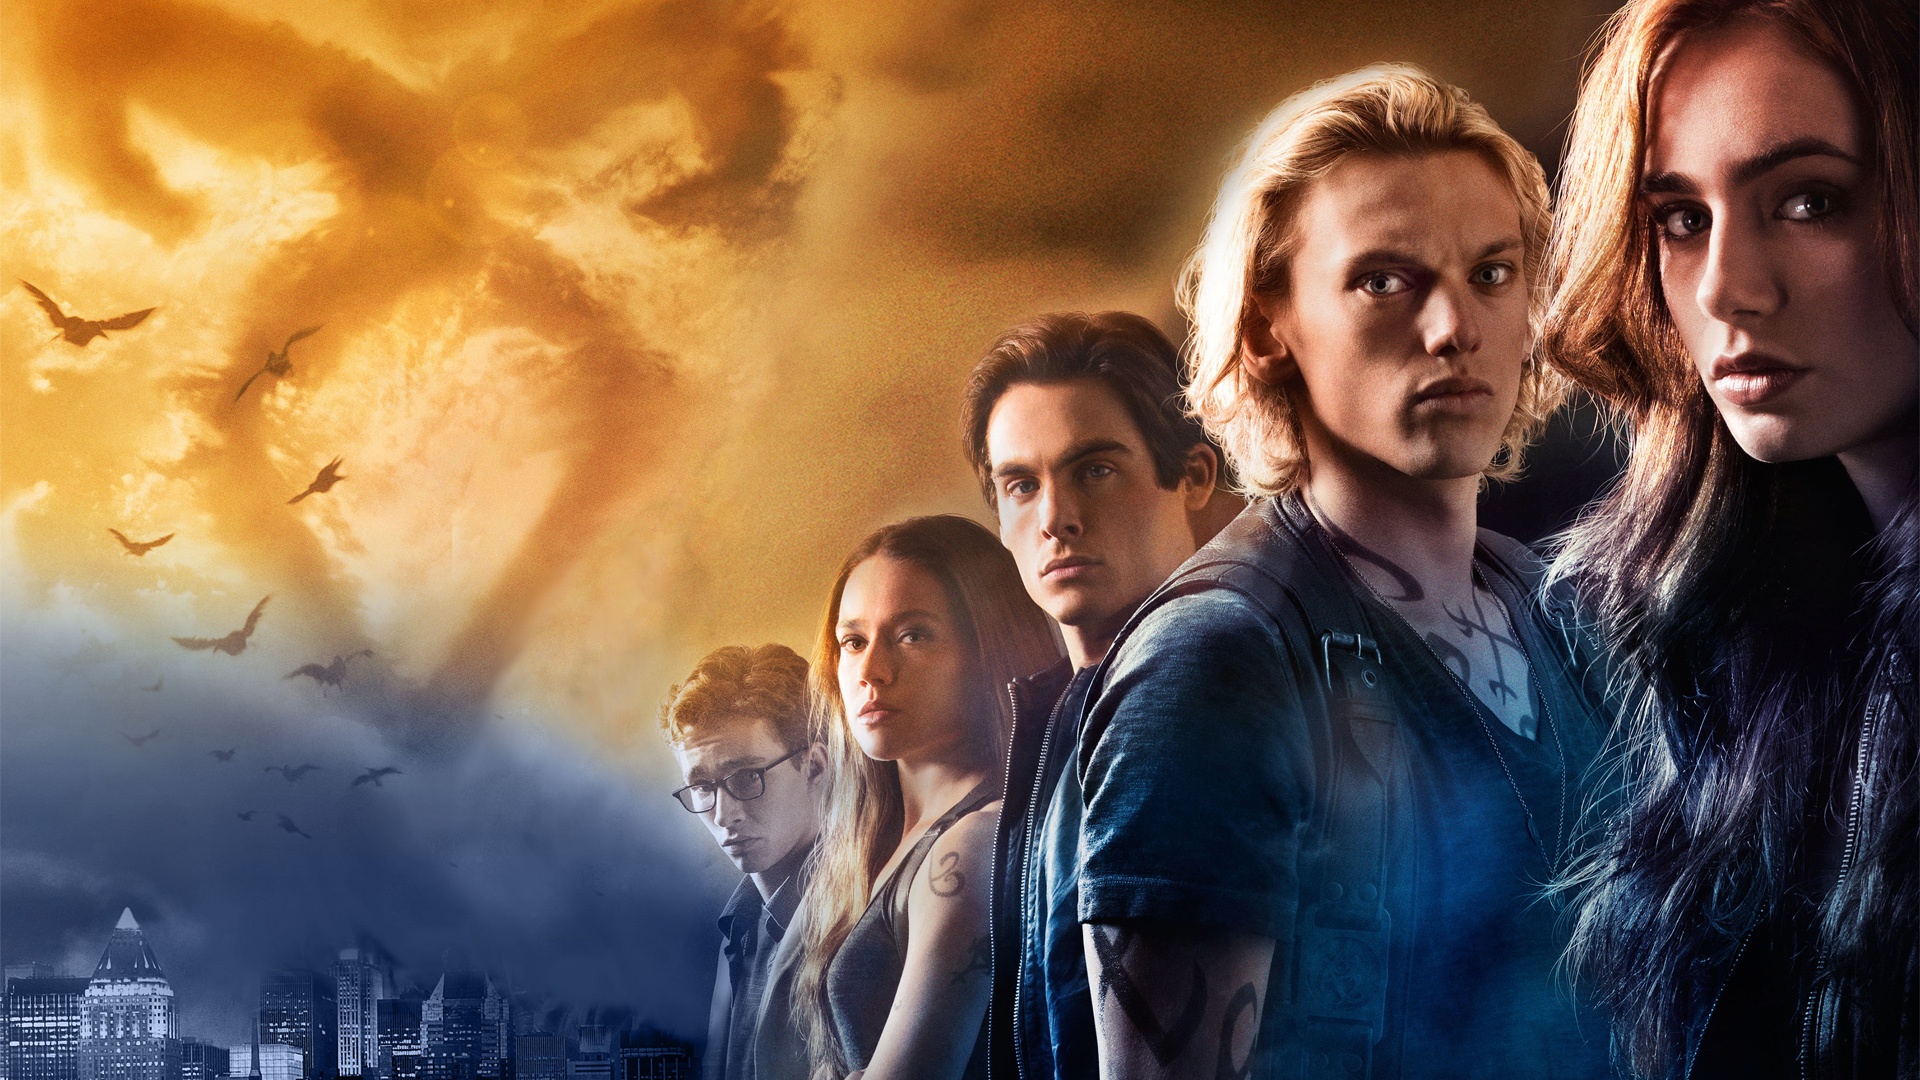 movie, the mortal instruments: city of bones, jamie campbell bower, jemima west, jonathan rhys meyers, lily collins, robert sheehan